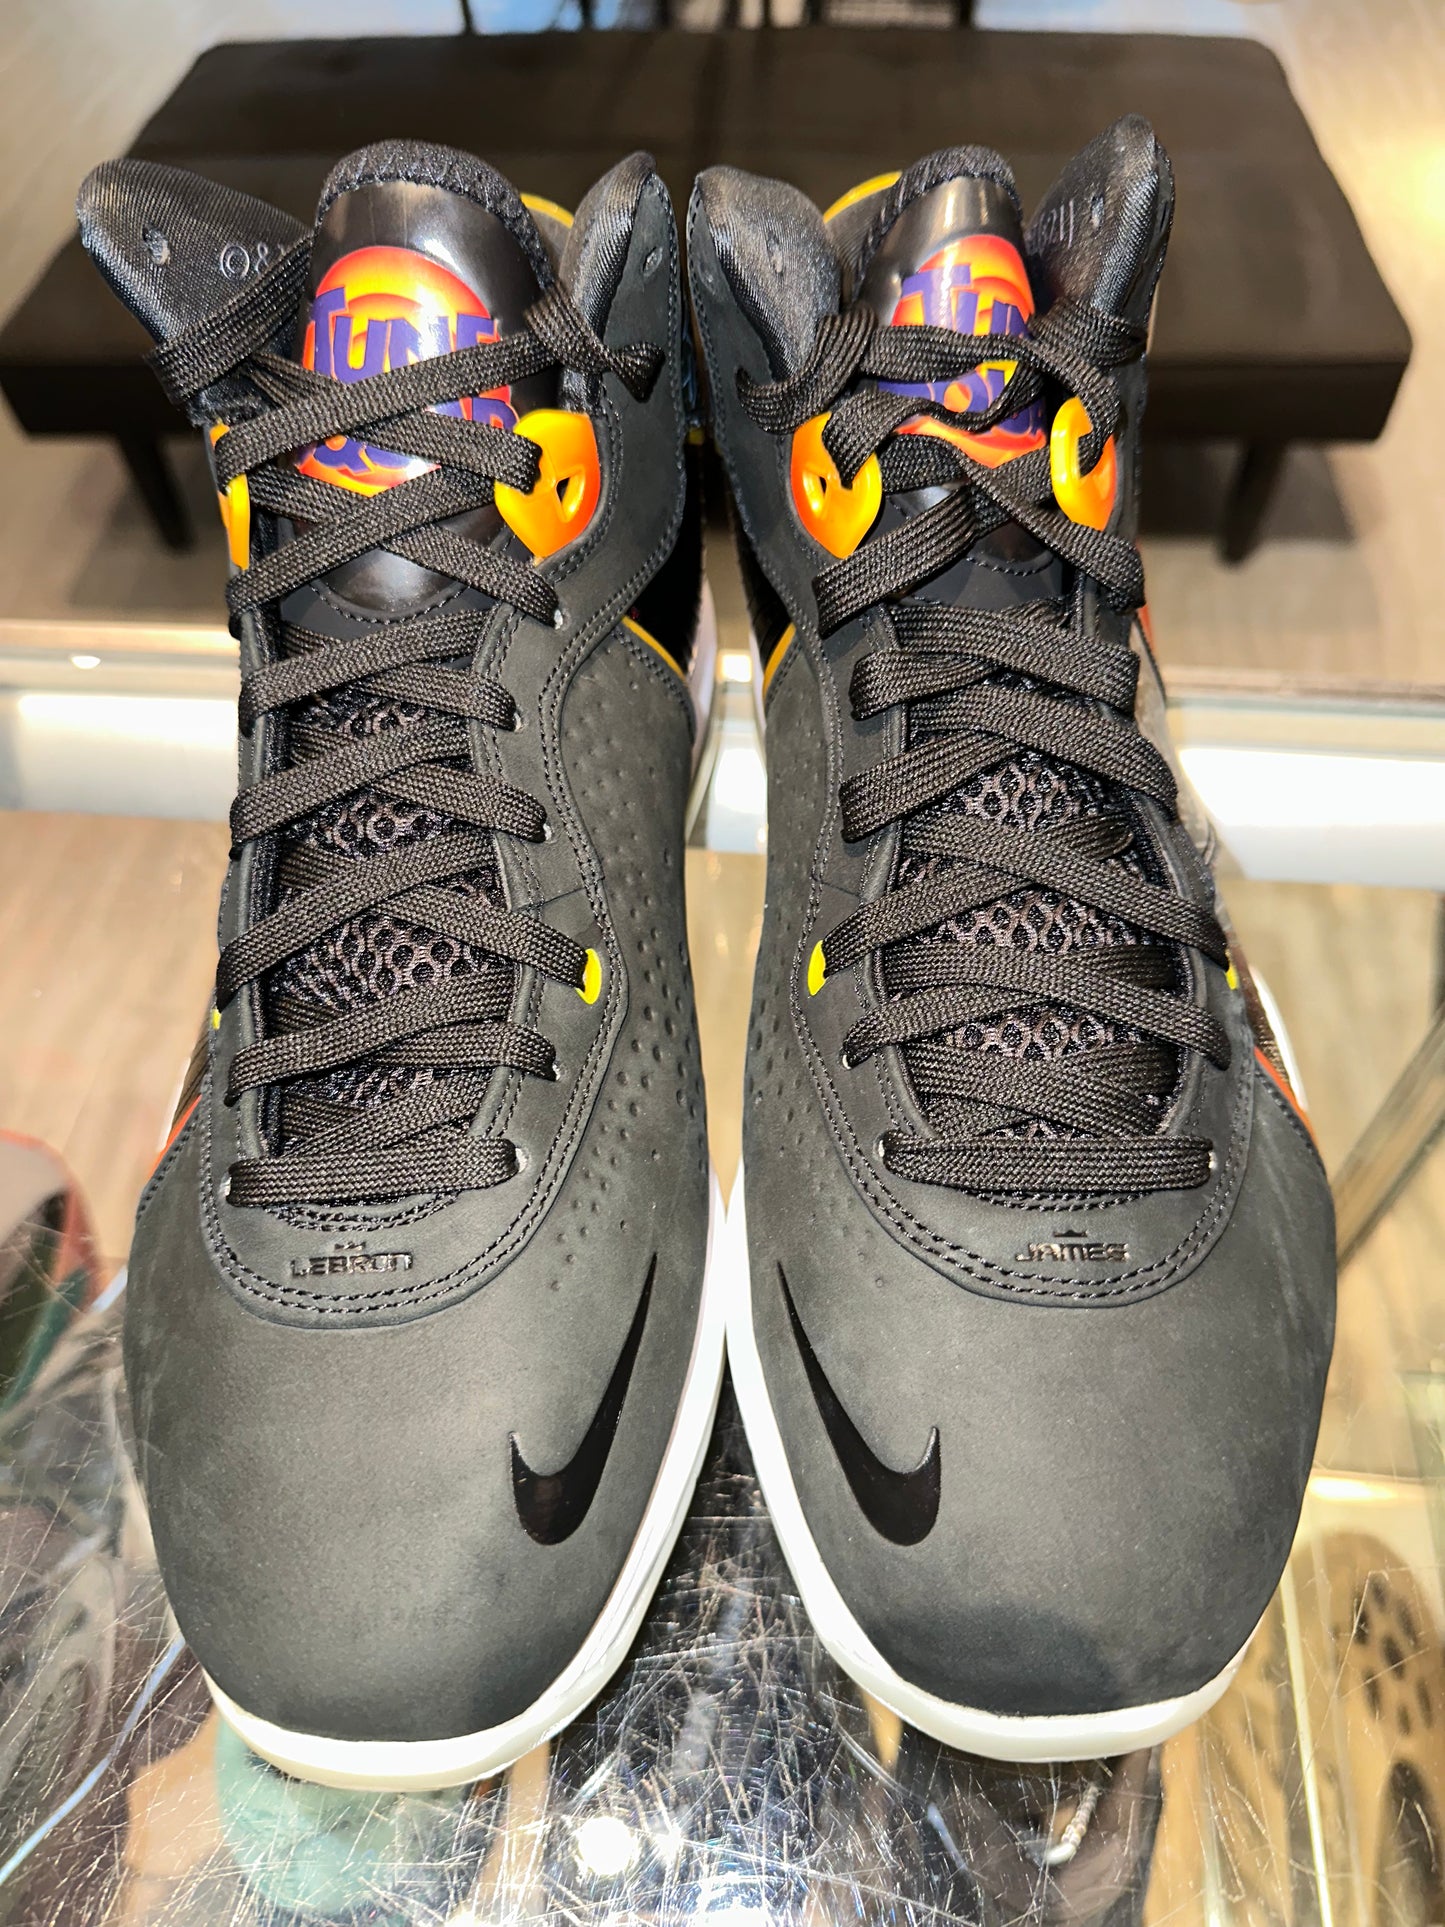 Size 11 Lebron 8 “Space Jam” Brand New (Mall)